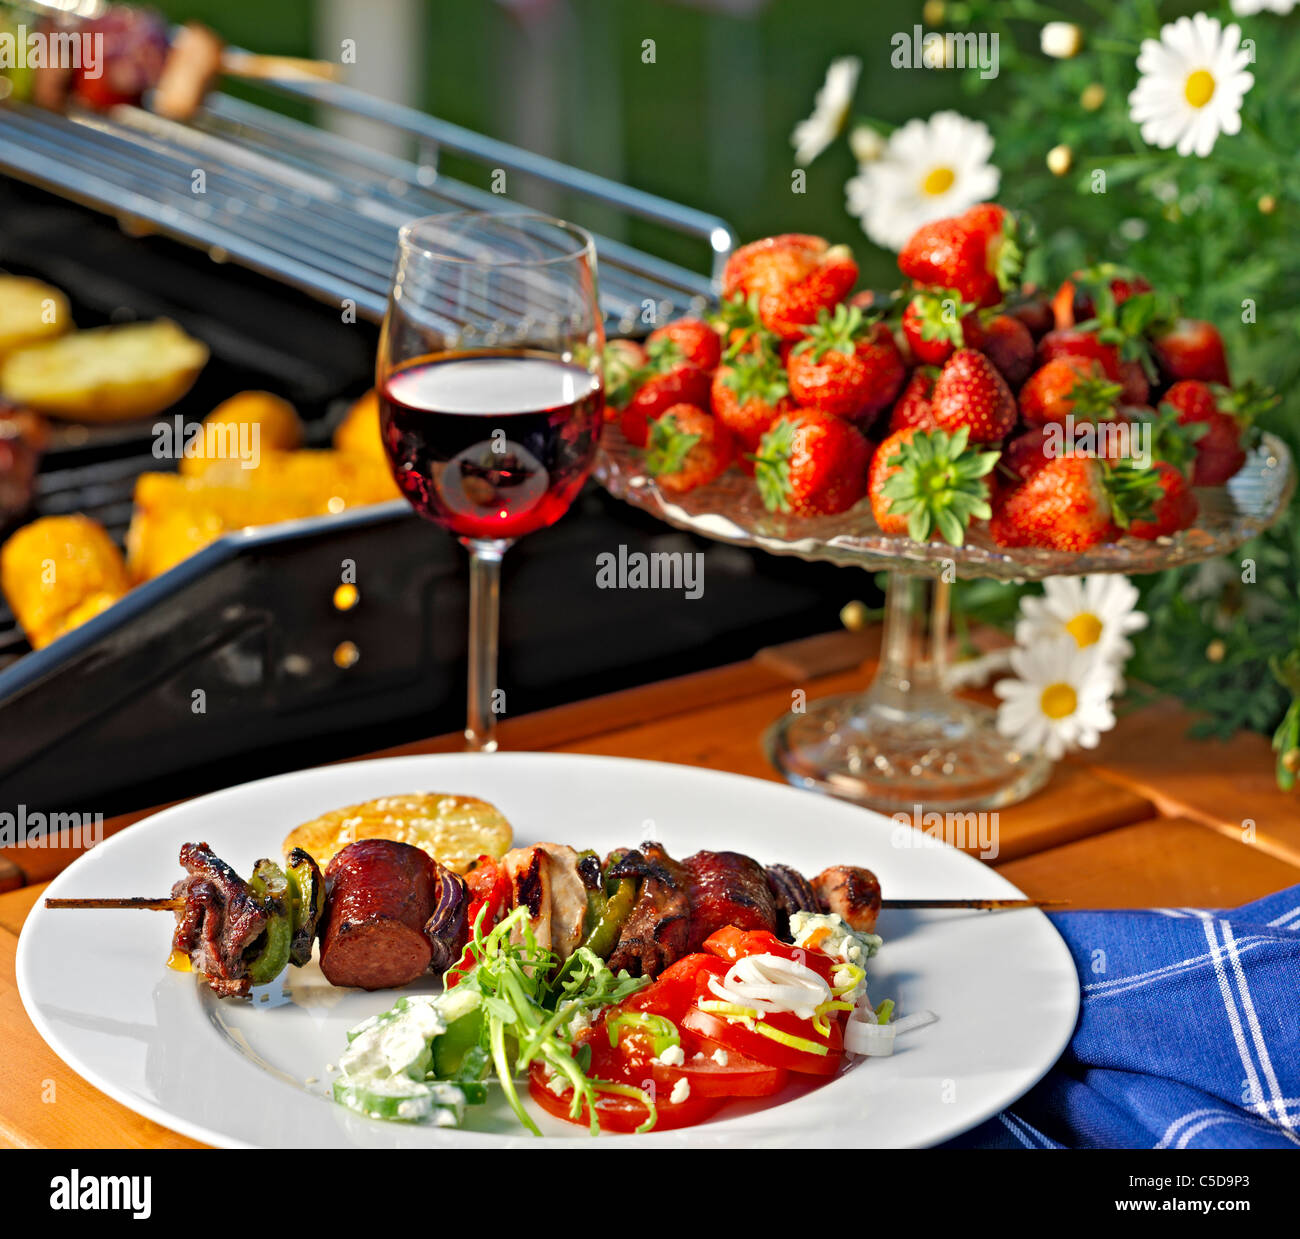 Skewers In Plate With Wine Glass And Strawberries At The Backyard